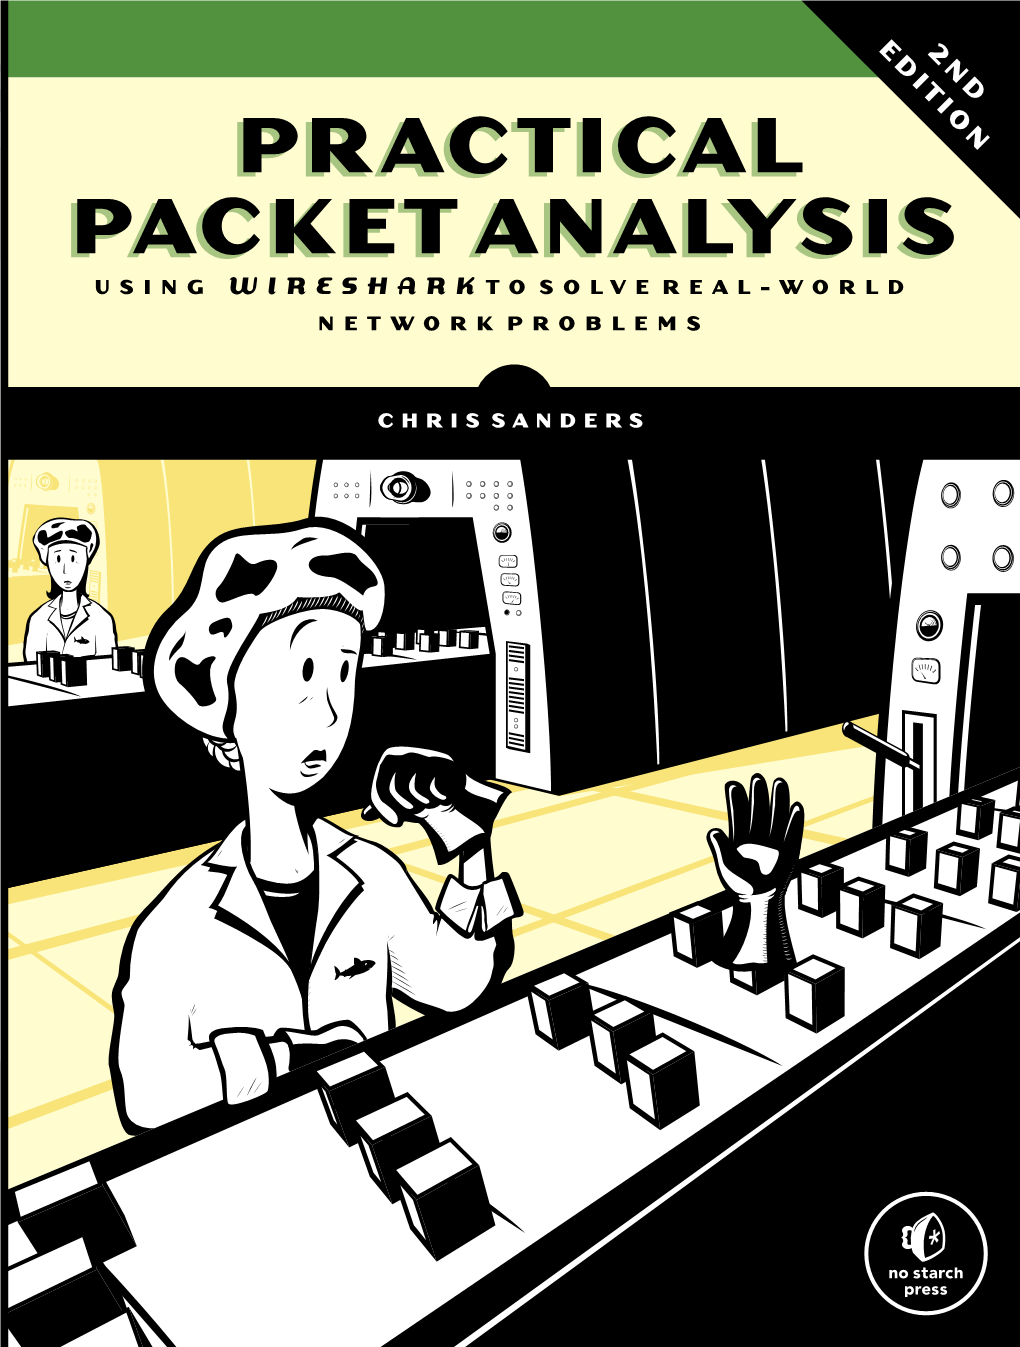 Practical Packet Analysis, Using Wireshark to Solve Real